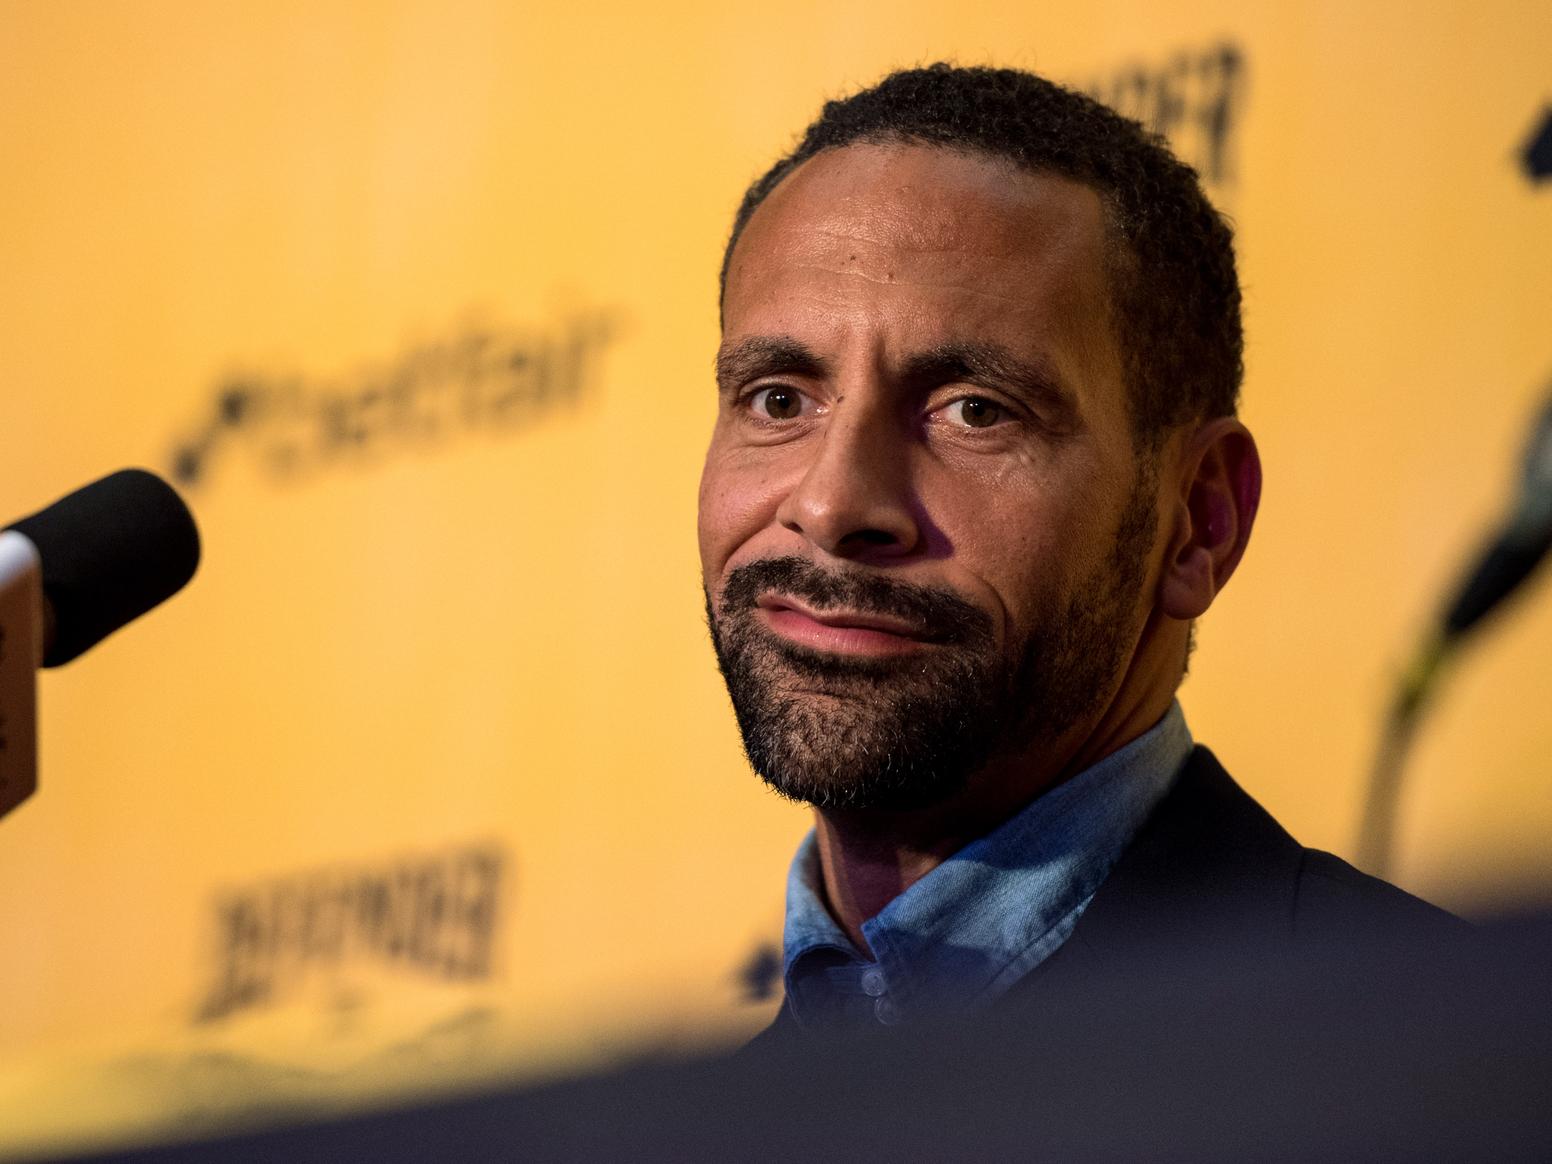 Ex-Leeds United star Rio Ferdinand has claimed that his motivation to leave the club to join Manchester United in 2002 was solely to win trophies, and has urged Spurs' Harry Kane to follow his example. (BT Sport)